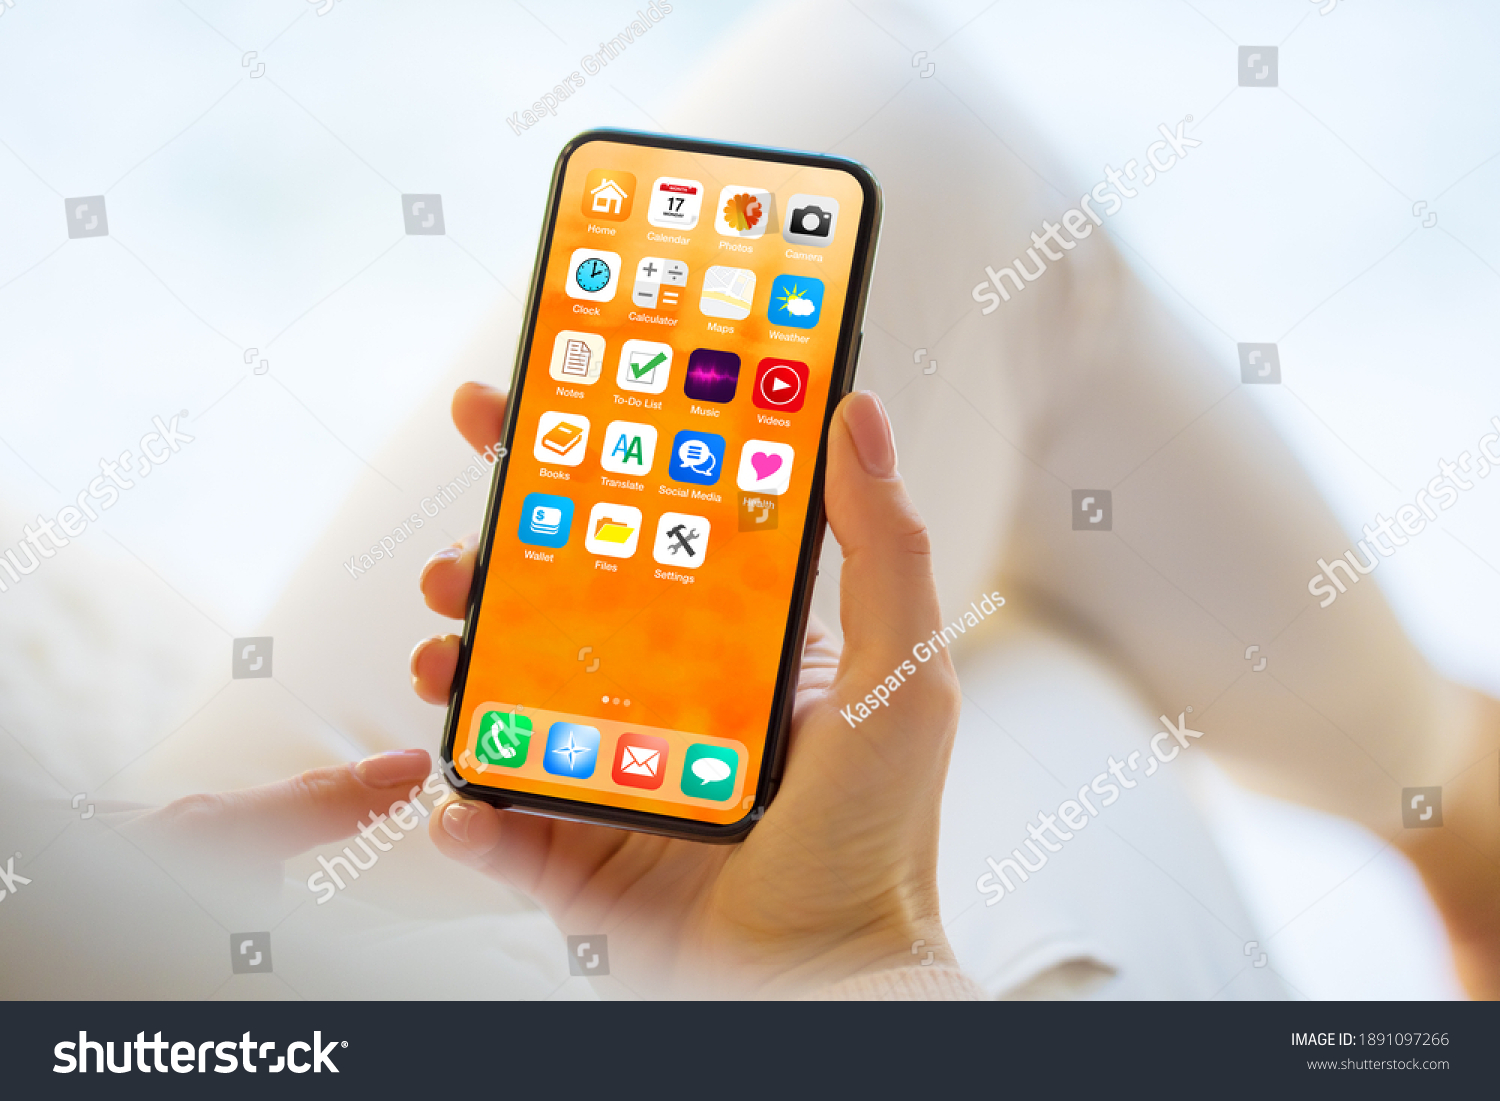 Woman using mobile phone with home screen opened showing different everyday app icons #1891097266